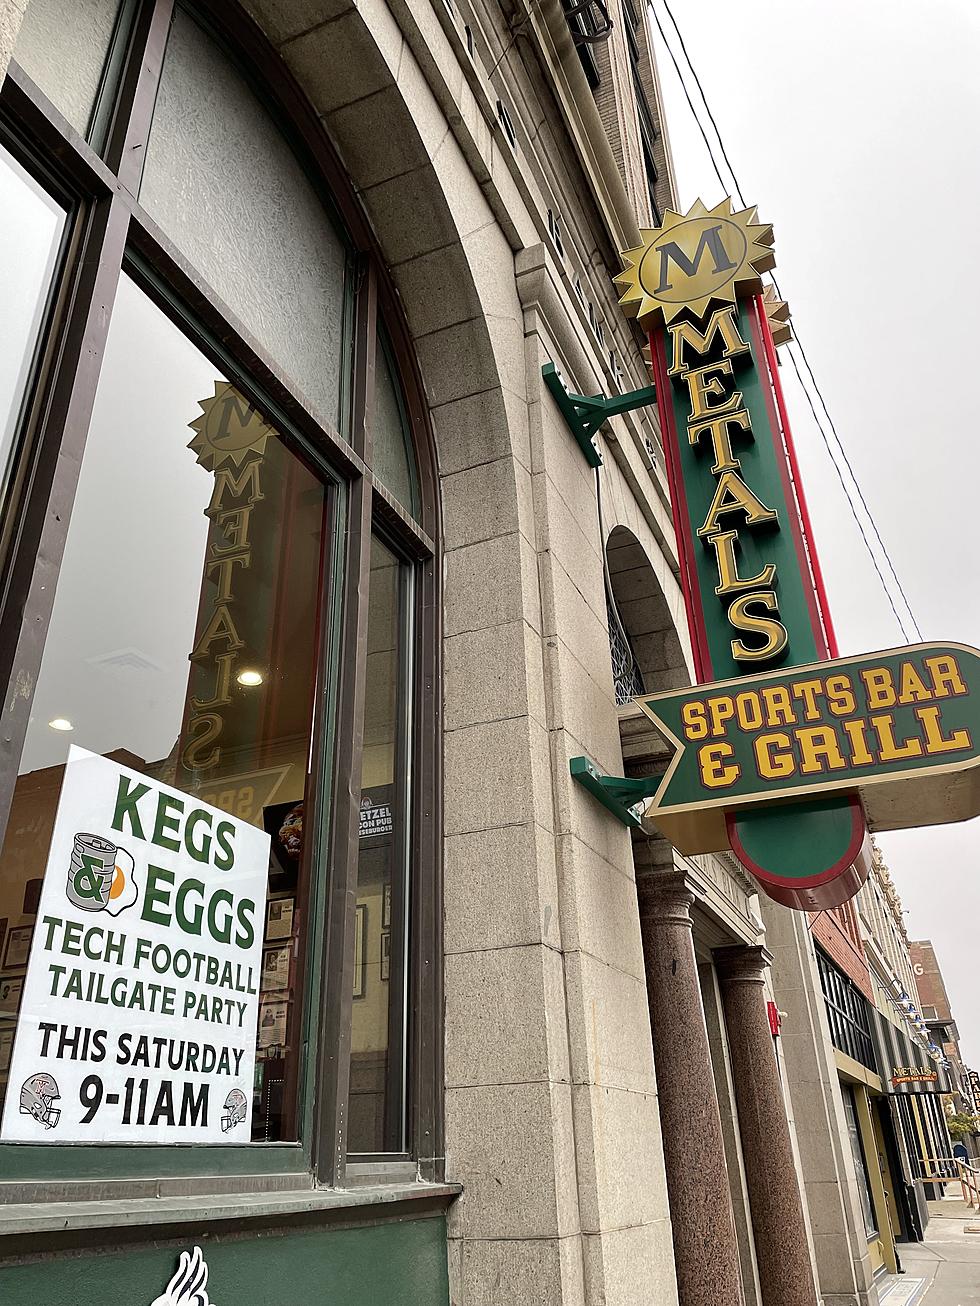 Football Is Almost Here, And That Means Kegs & Eggs